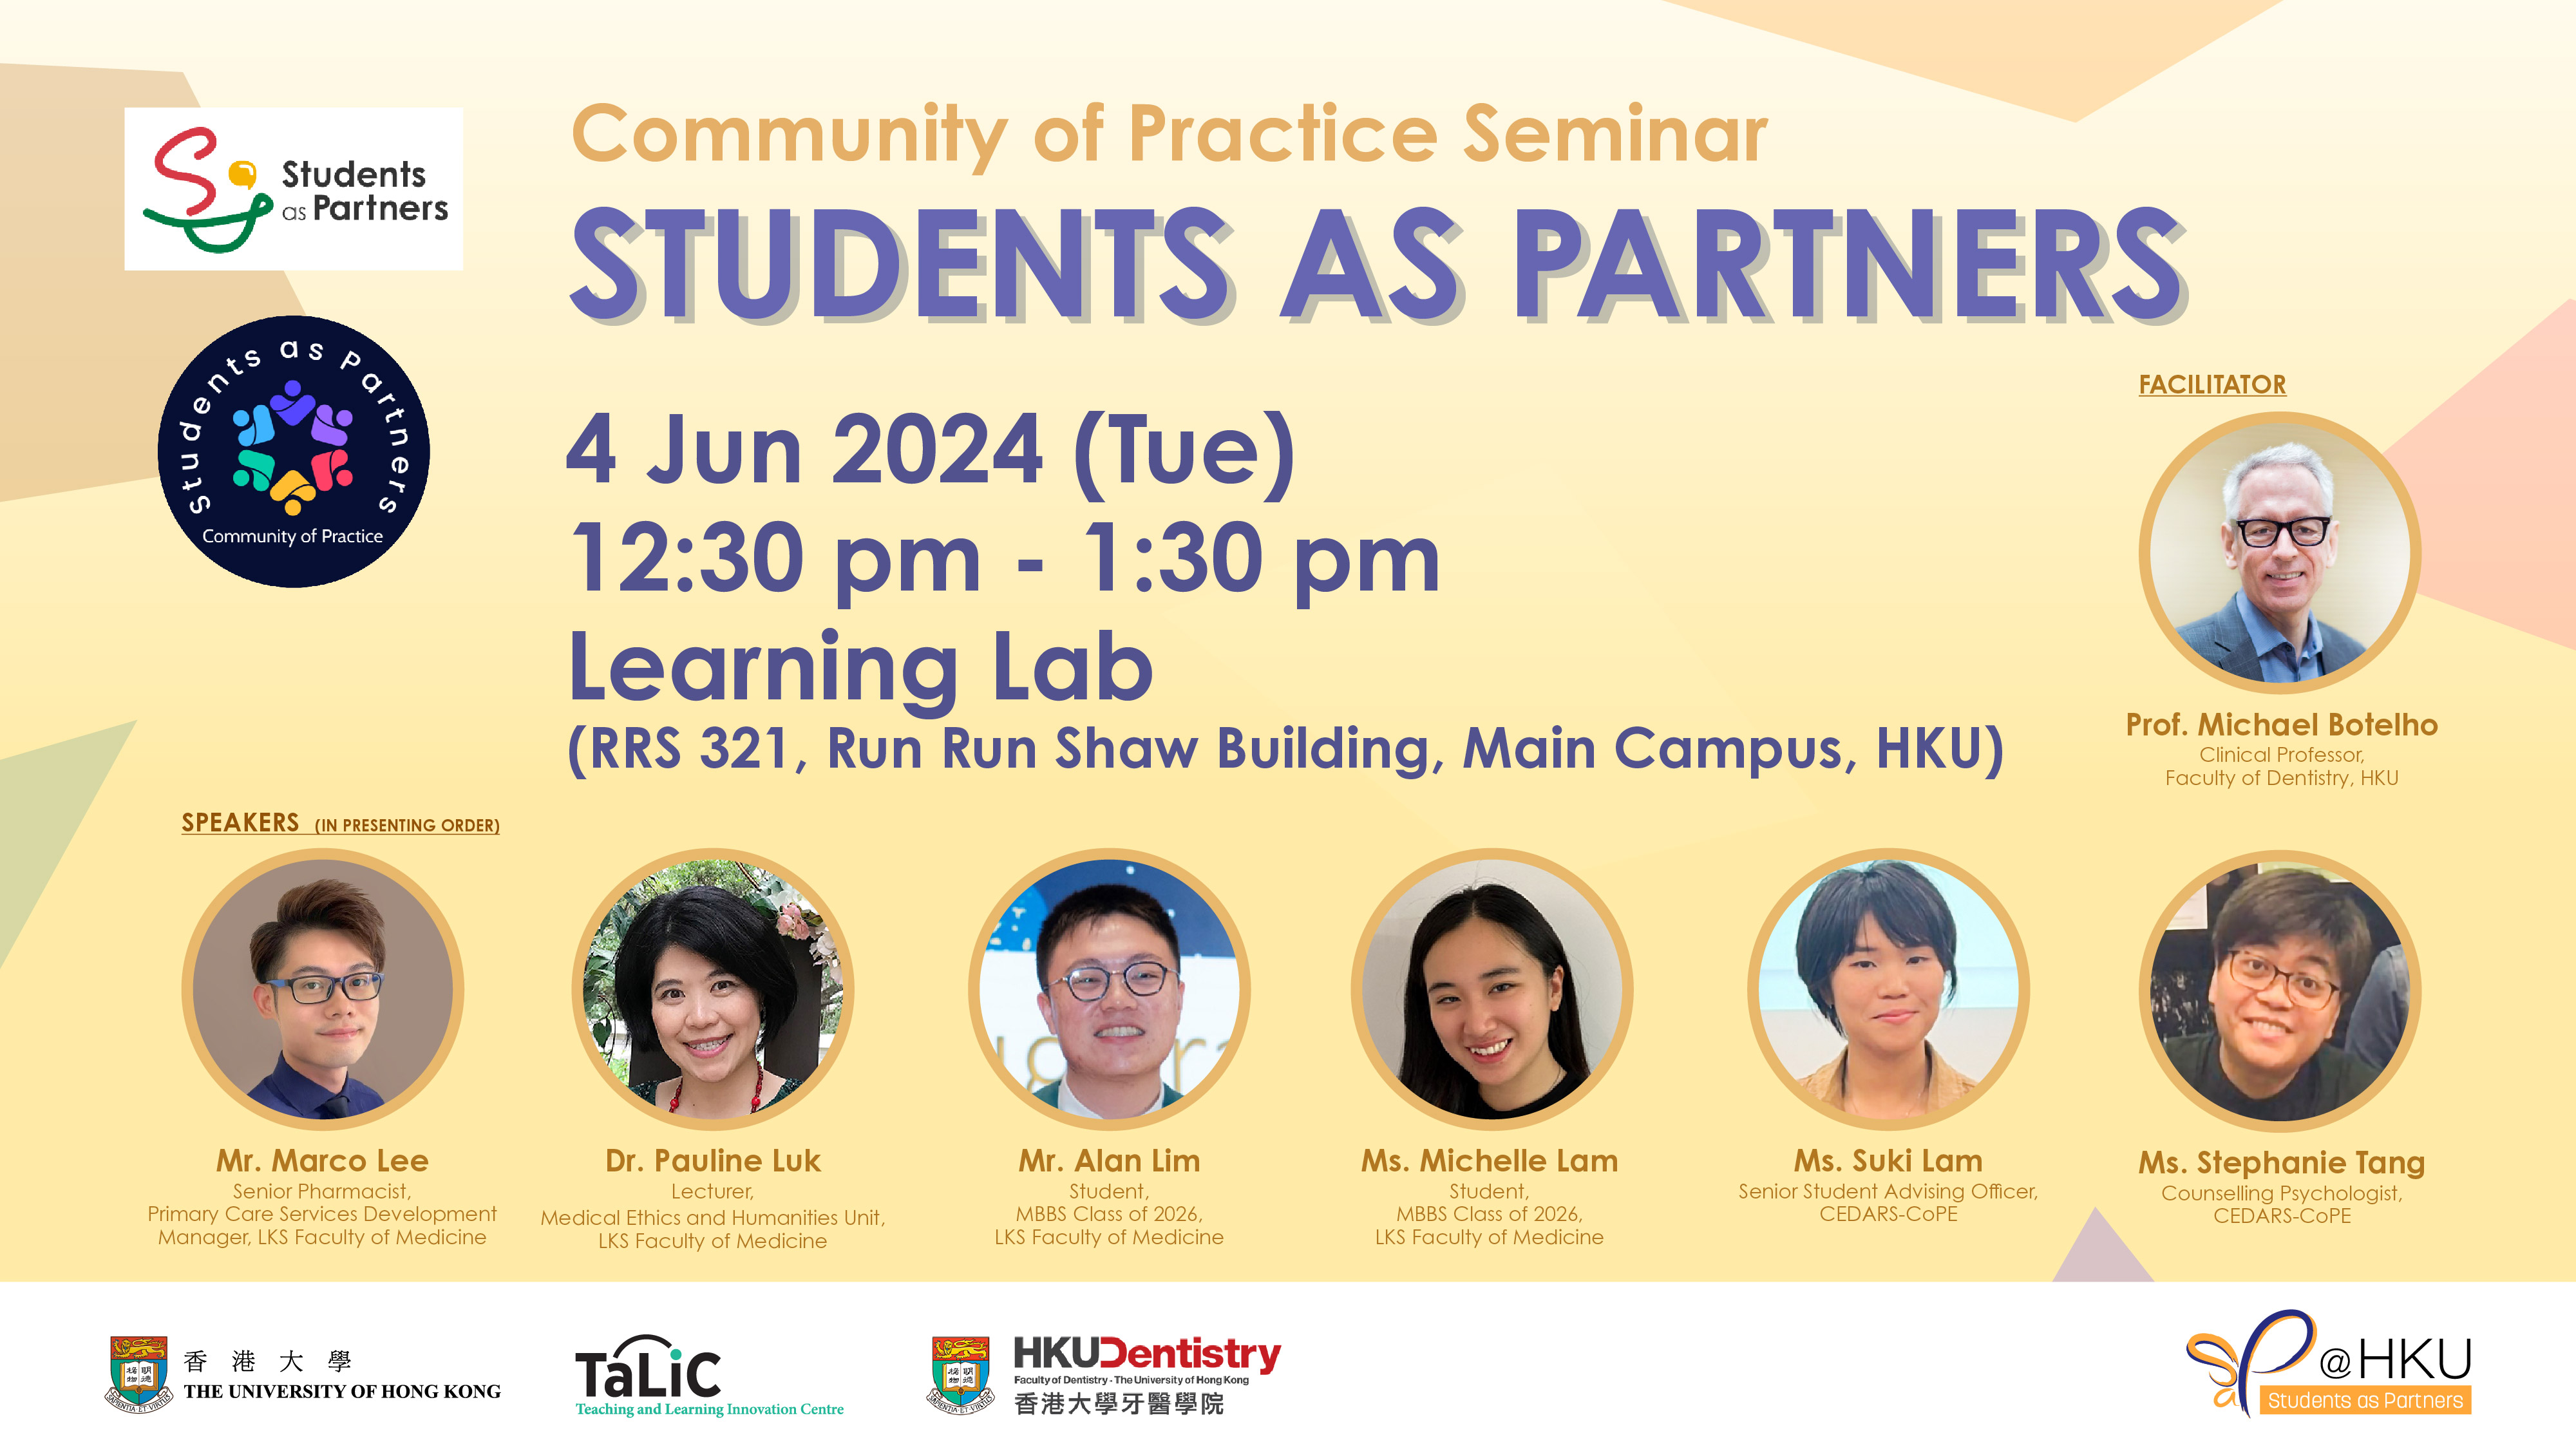 Students as Partners: Community of Practice Seminar